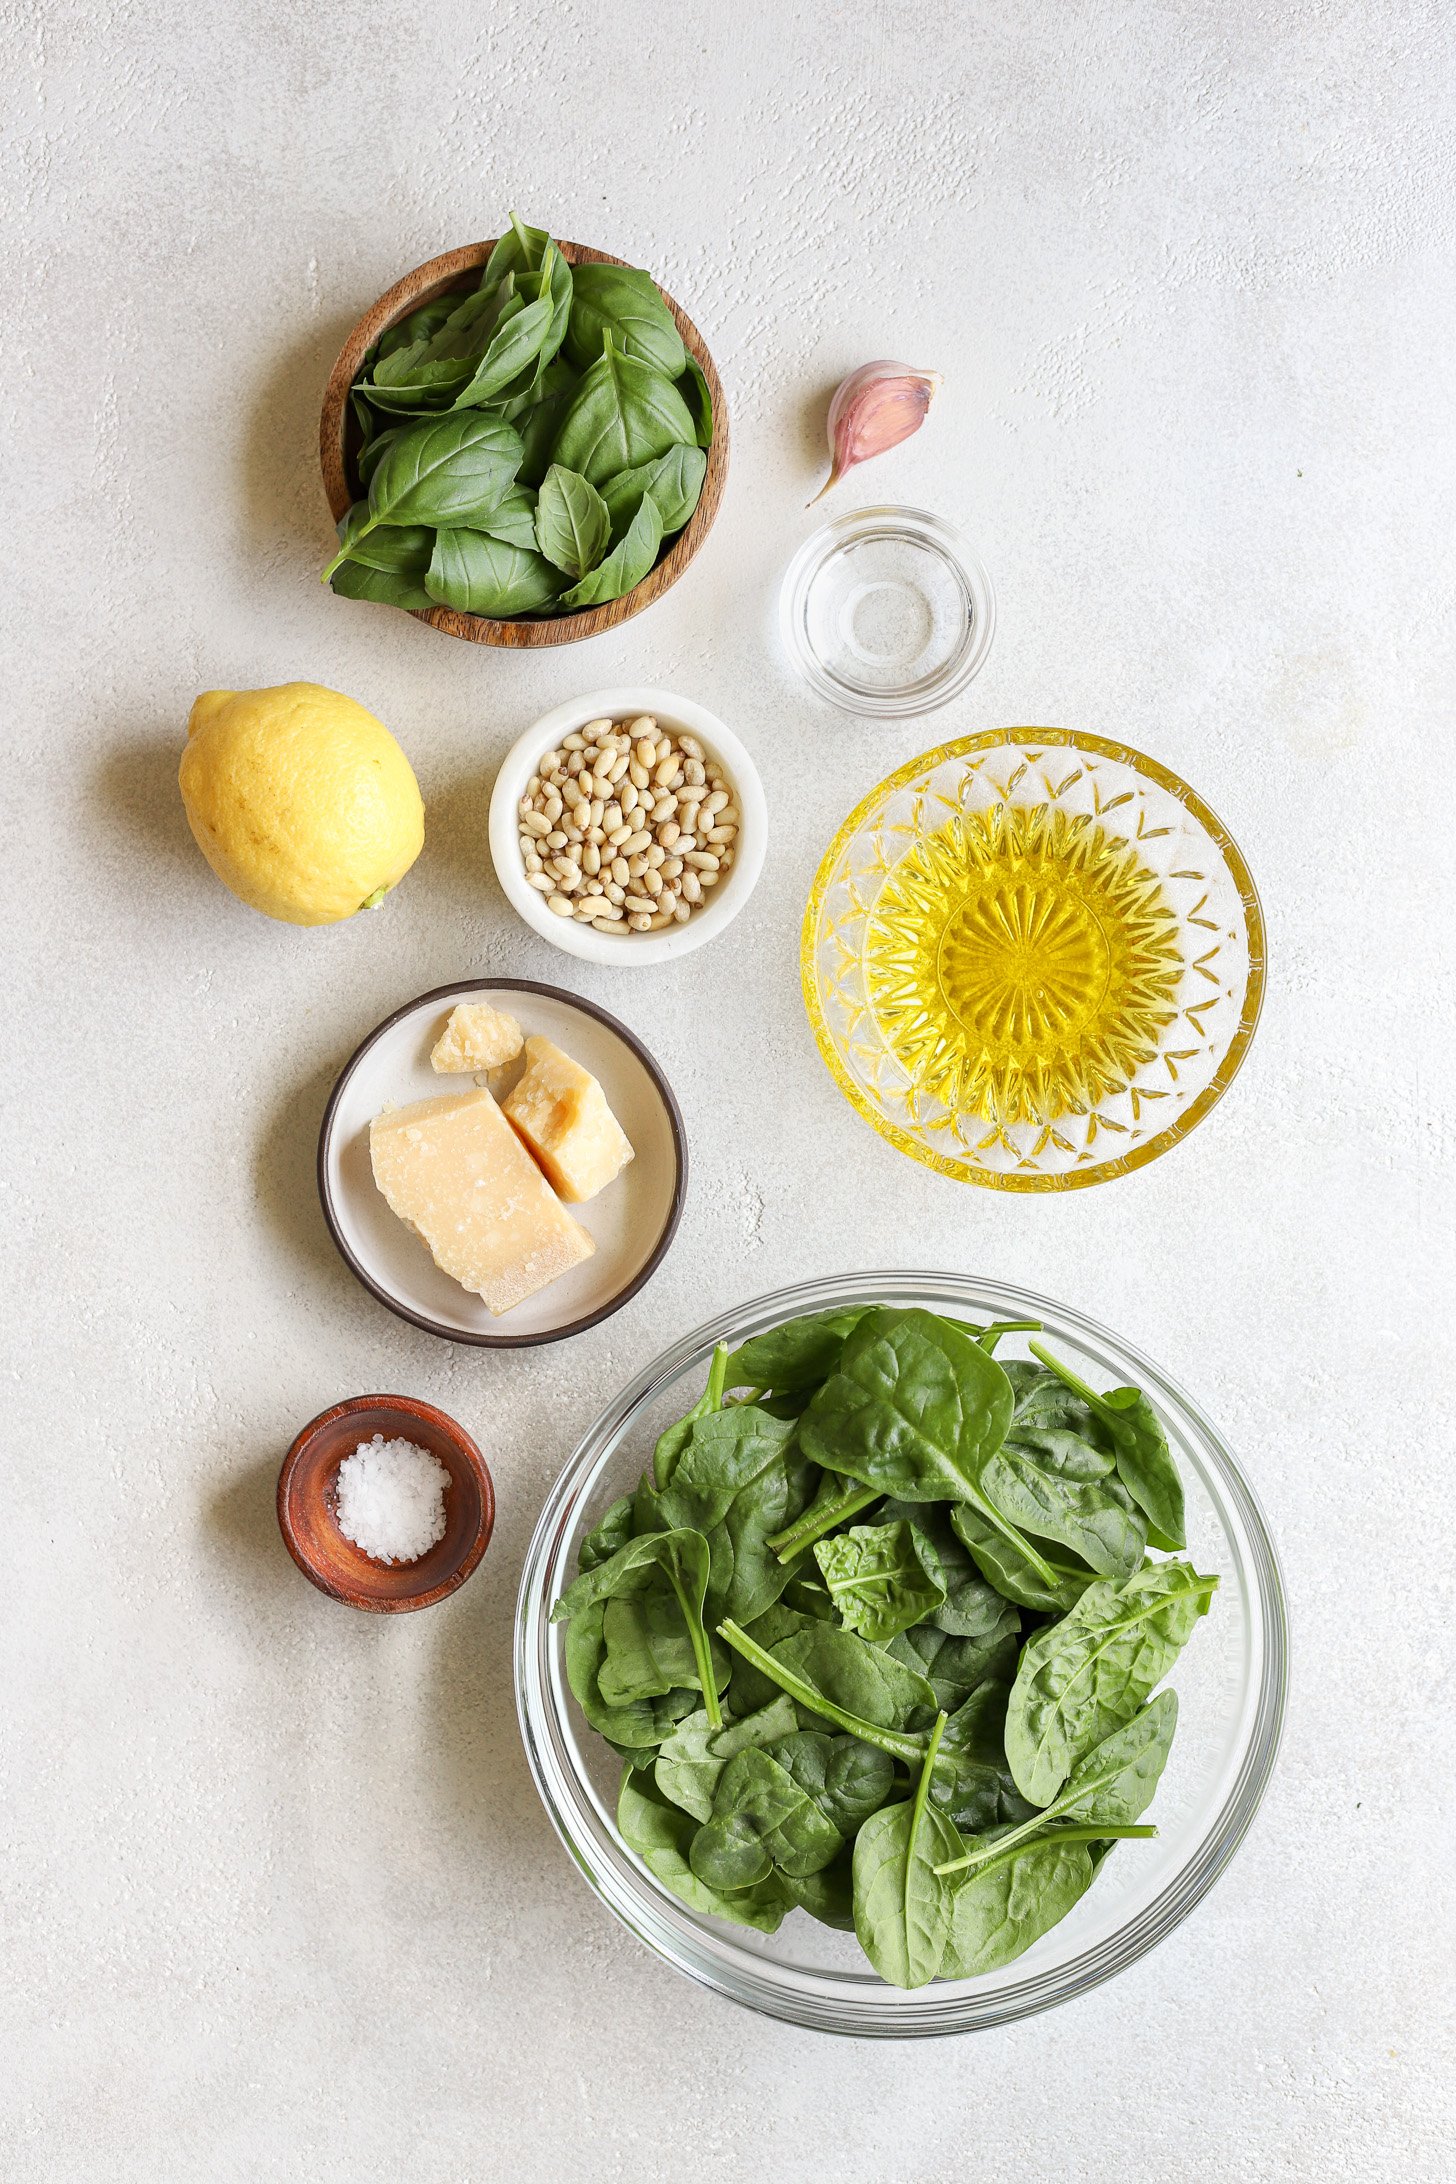 Ingredients for spinach pesto on a table in bowls.